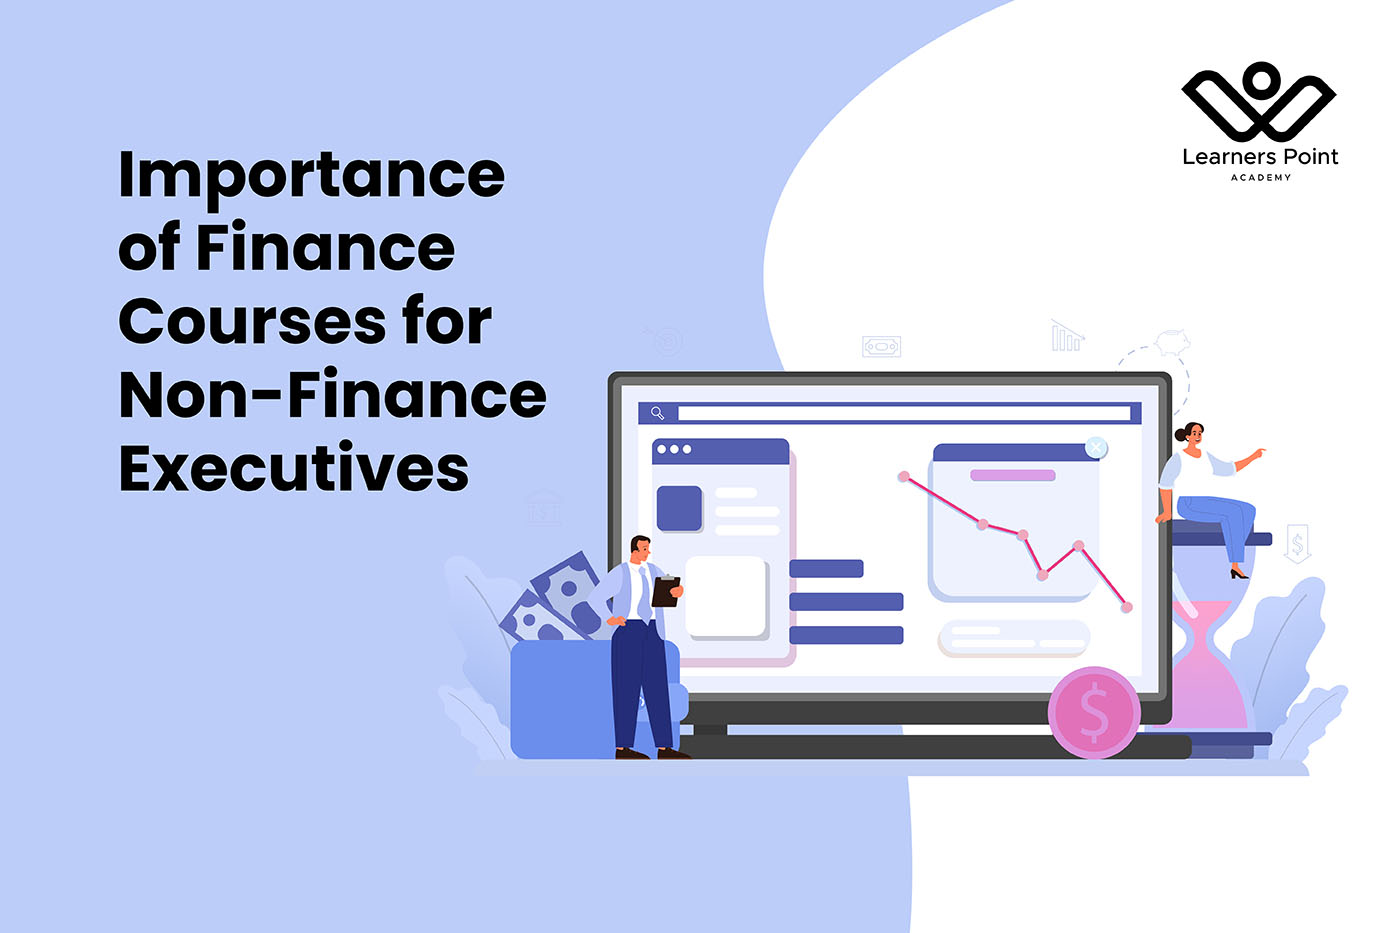 Importance of Finance Courses for Non-Finance Executives